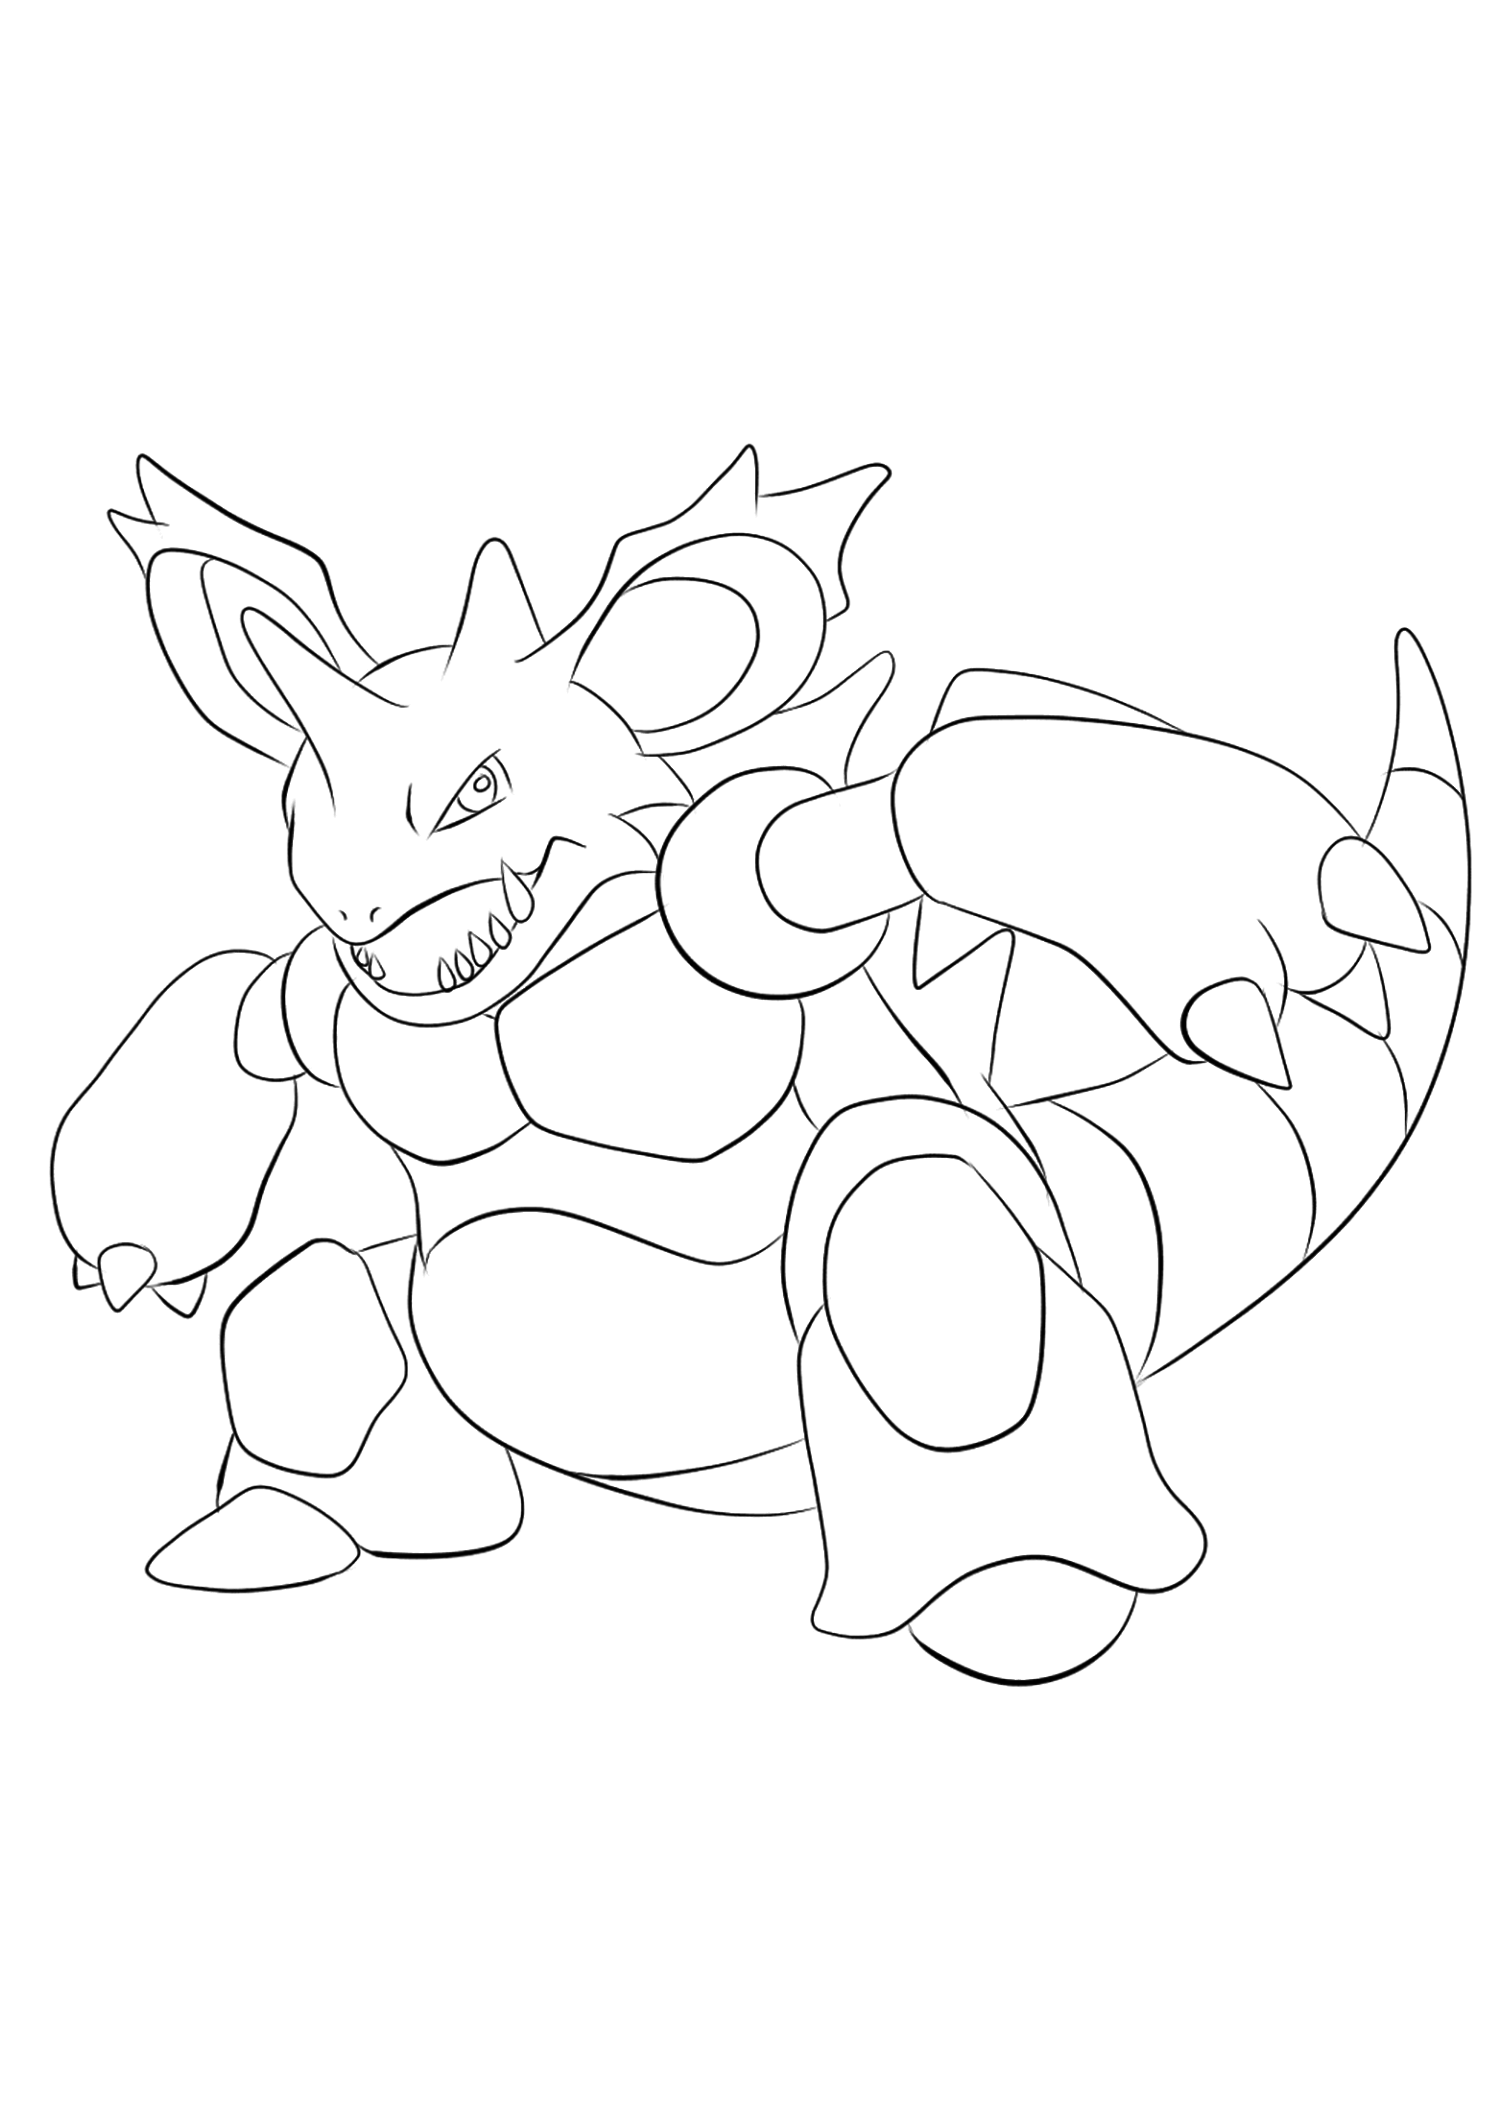 Nidoking (No.34). Nidoking Coloring page, Generation I Pokemon of type Poison and GroundOriginal image credit: Pokemon linearts by Lilly Gerbil'font-size:smaller;color:gray'>Permission: All rights reserved © Pokemon company and Ken Sugimori.